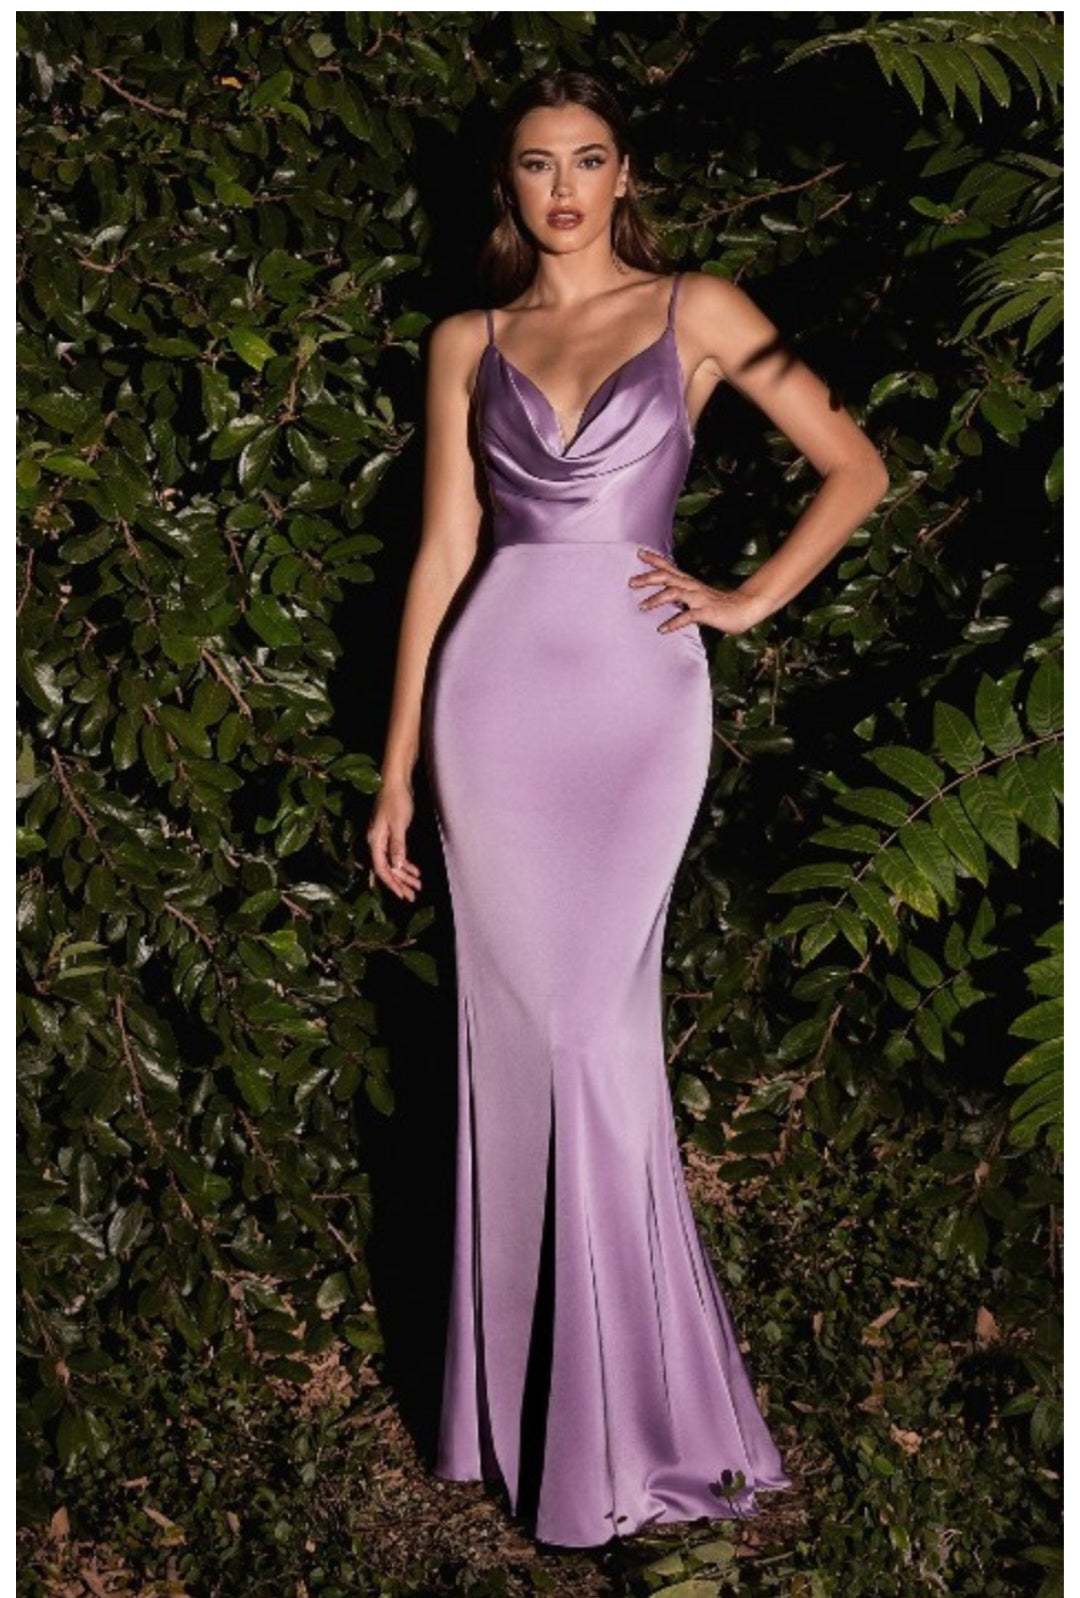 FITTED SATIN DRESS WITH COWL NECK AND OPEN BACK